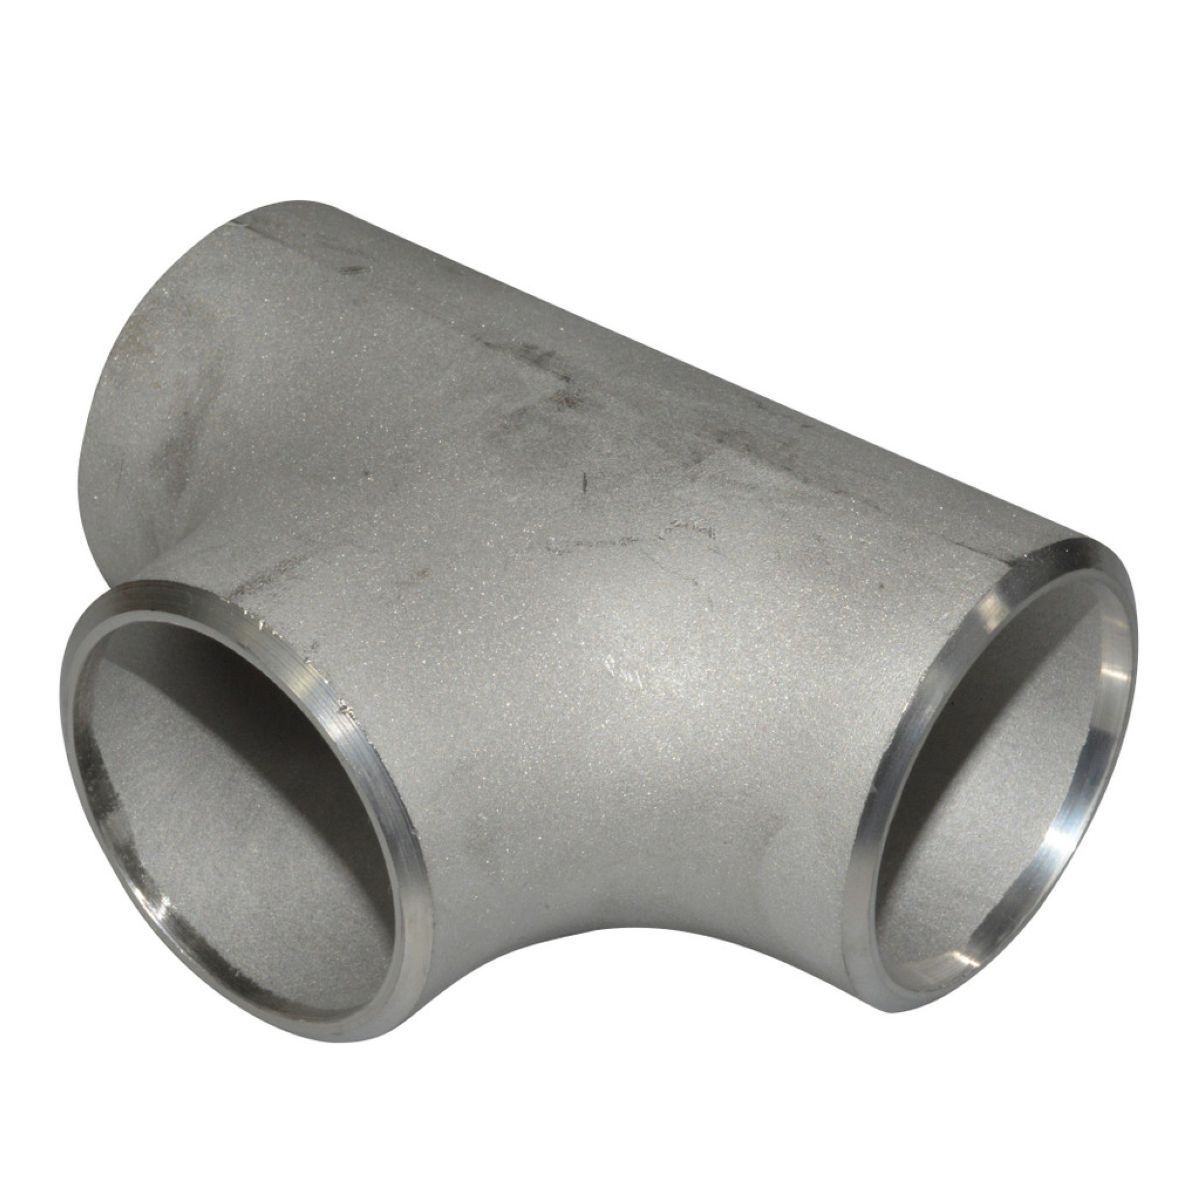 Tee | Butt Weld Fitting | SS316 Welded | Domestic